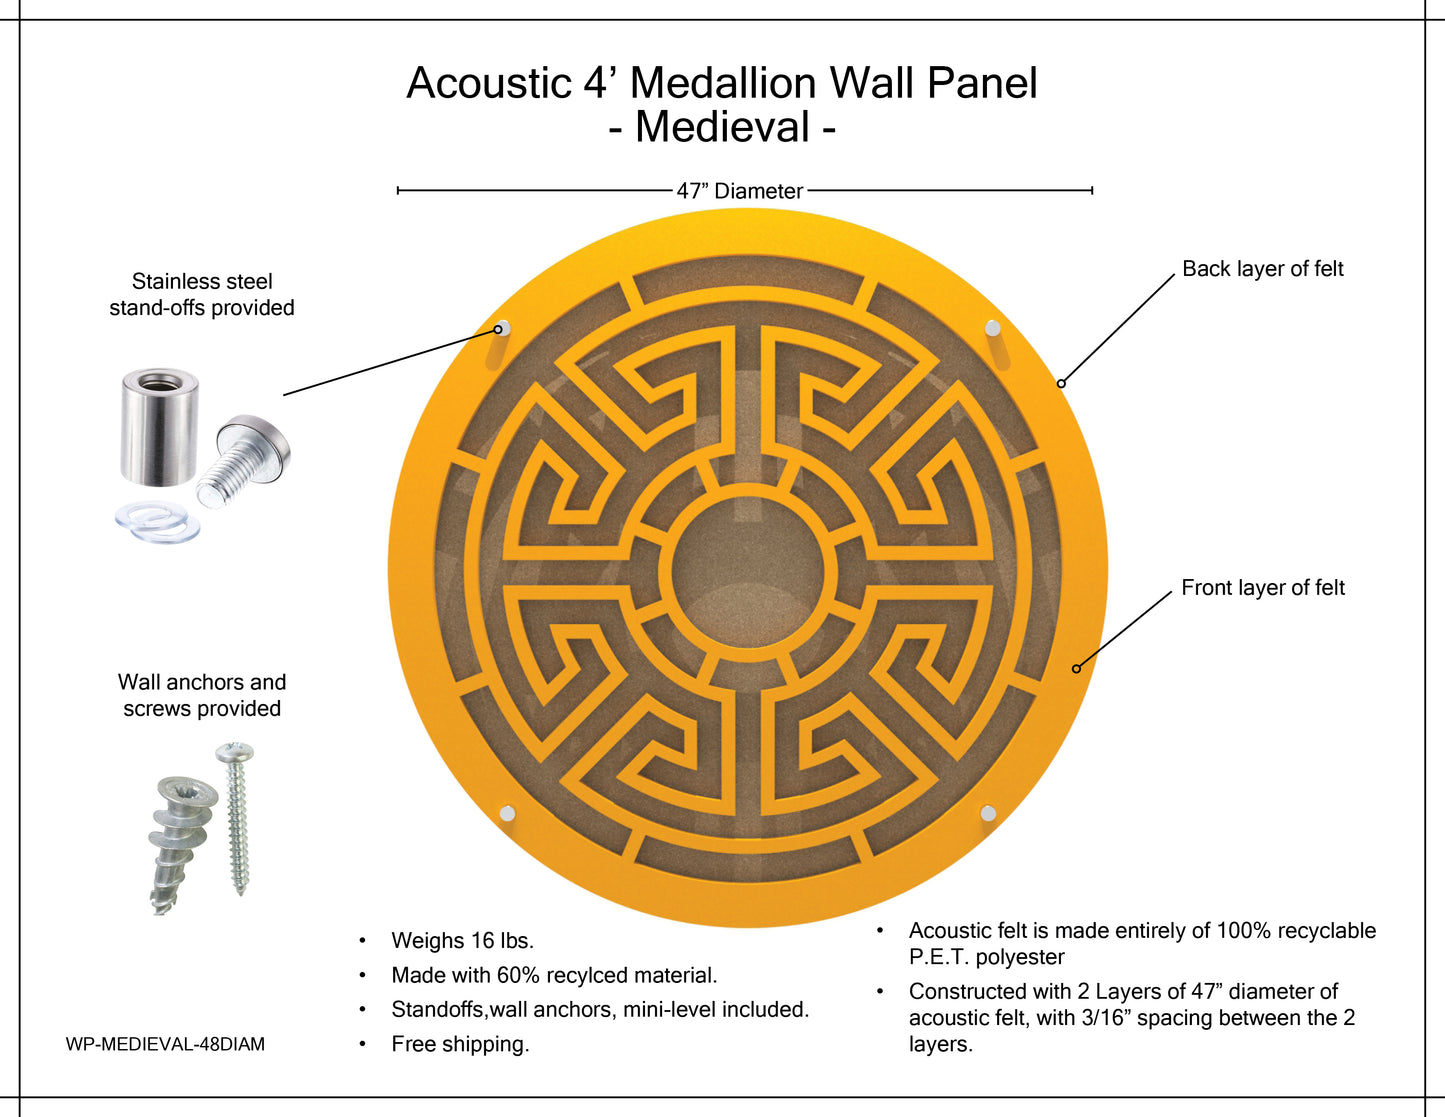 Medallion Acoustic Wall Panel - Medieval